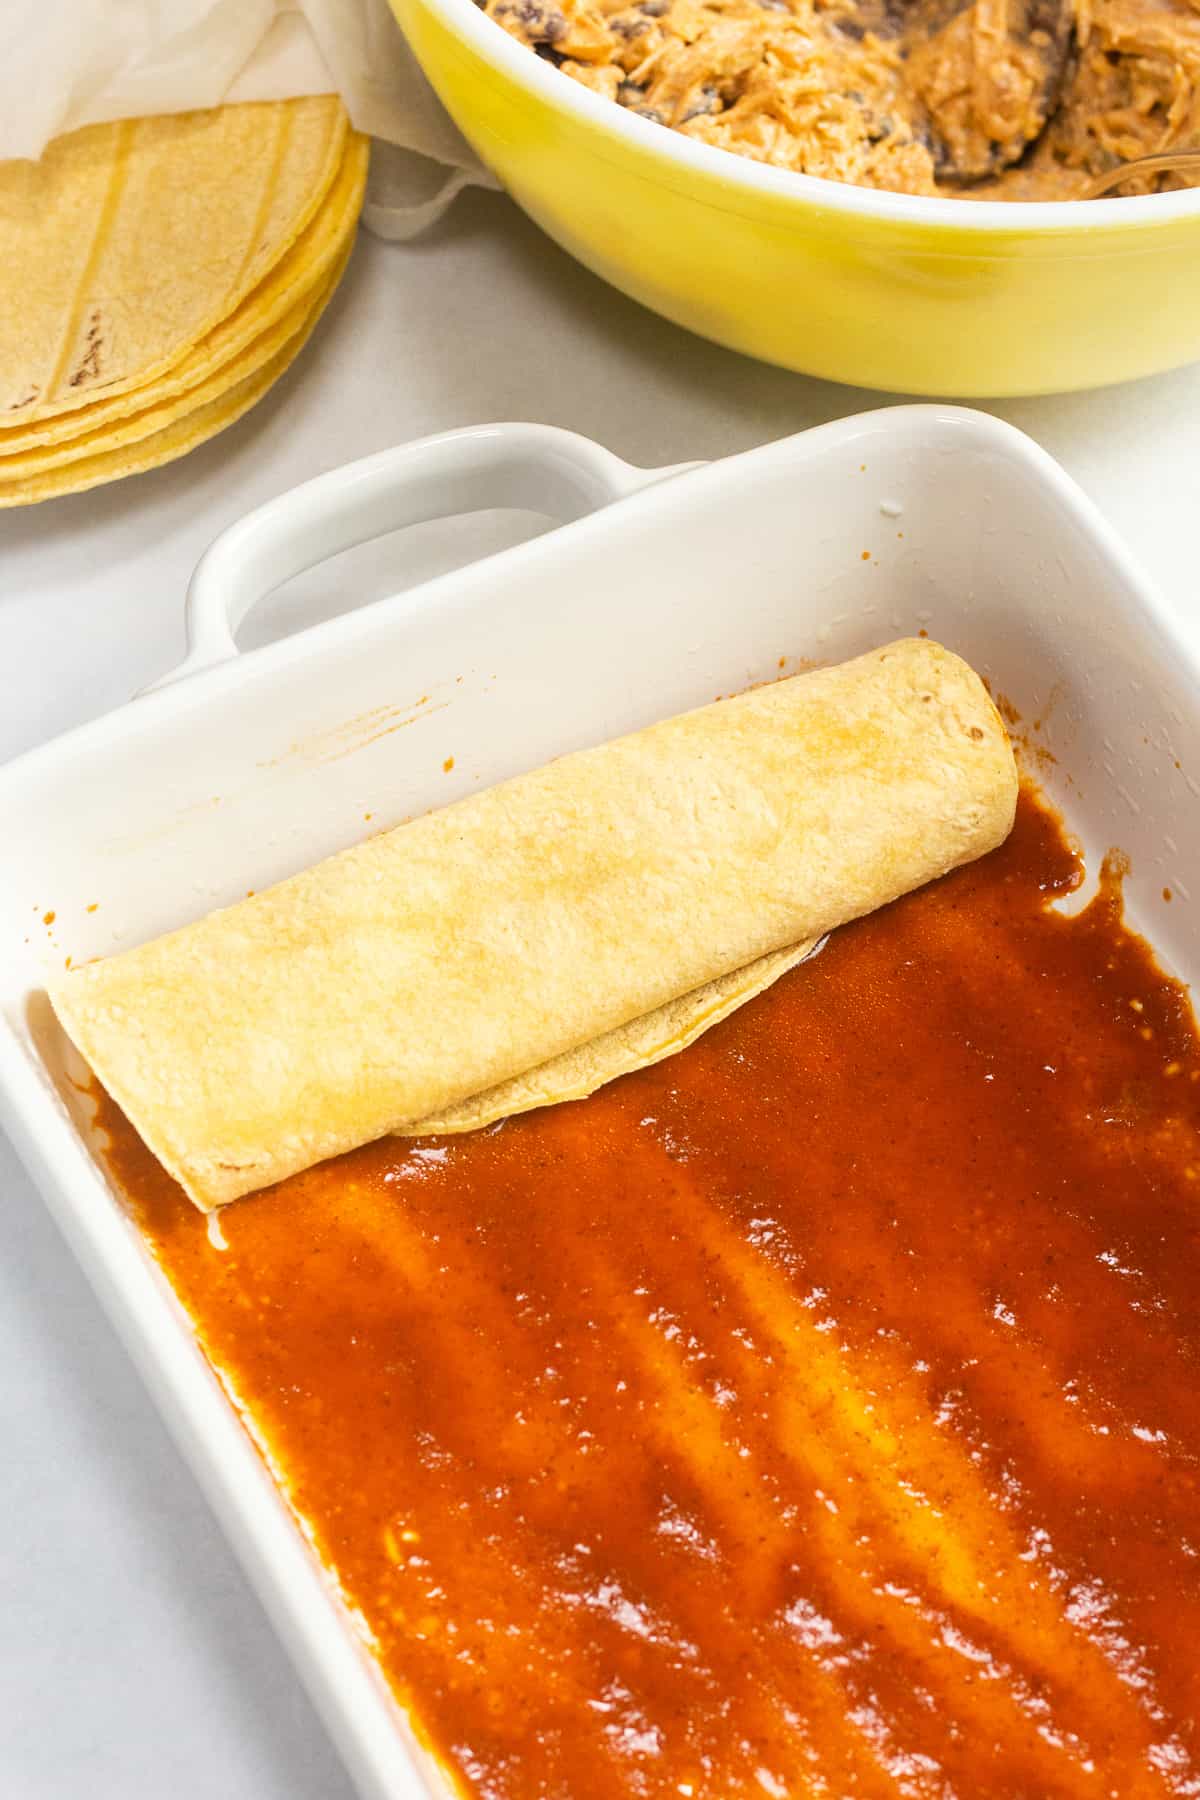 A rolled up uncooked enchilada